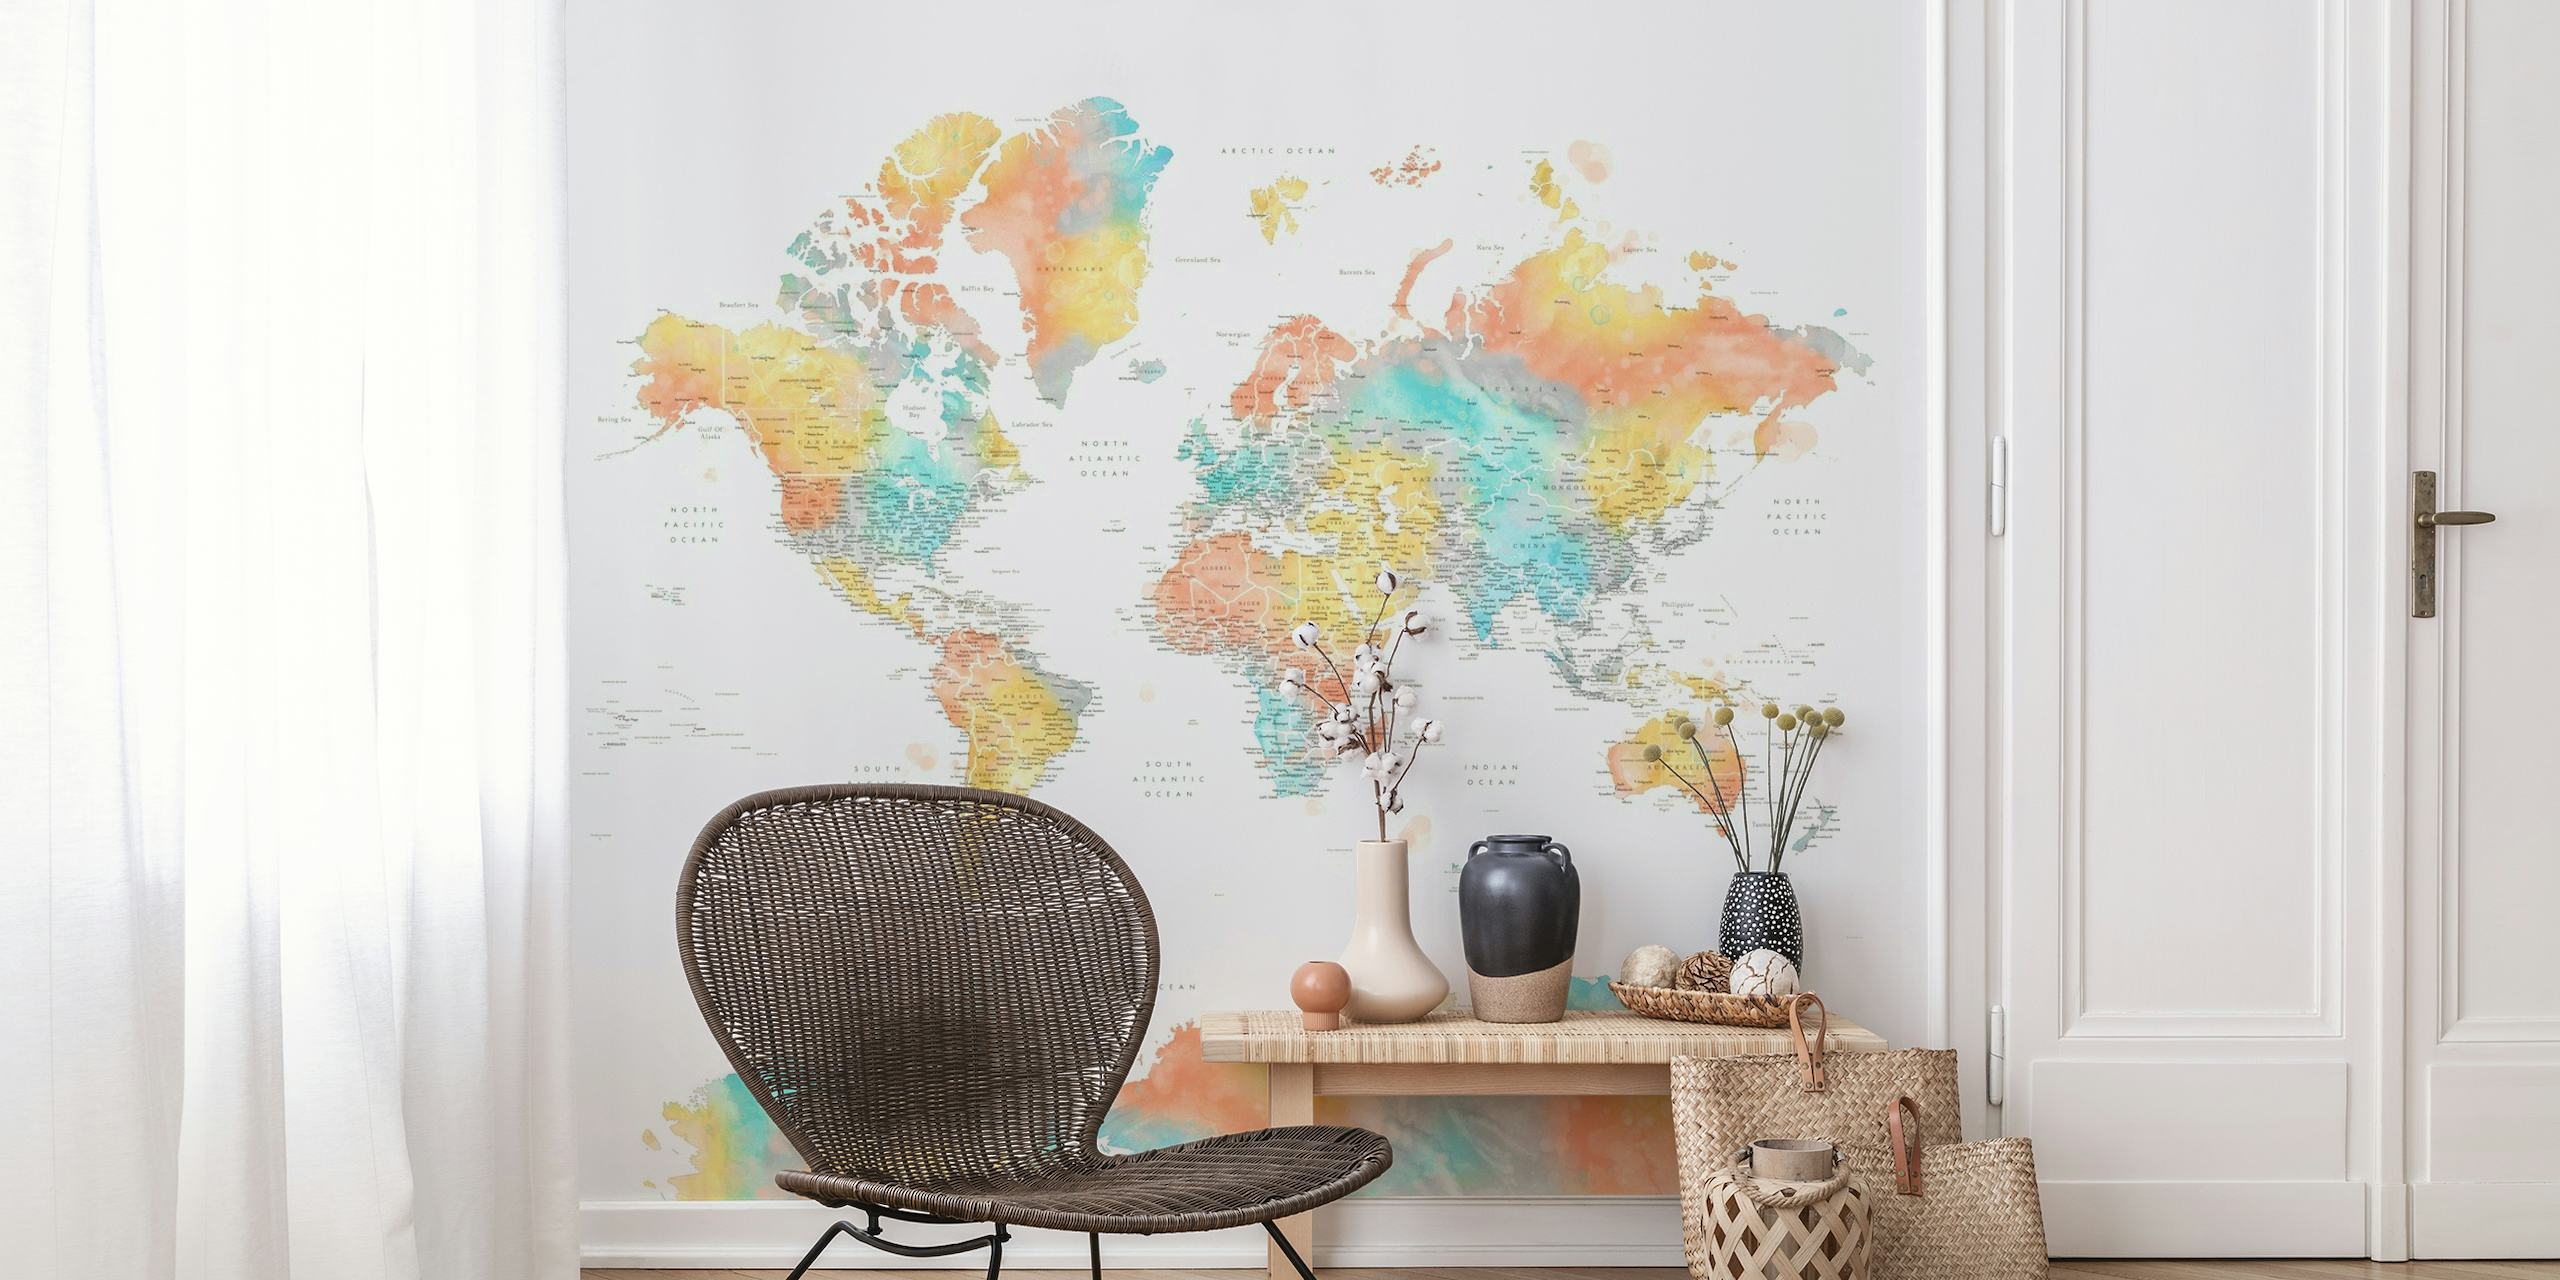 Artistic watercolor world map wall mural with a focus on Antarctica